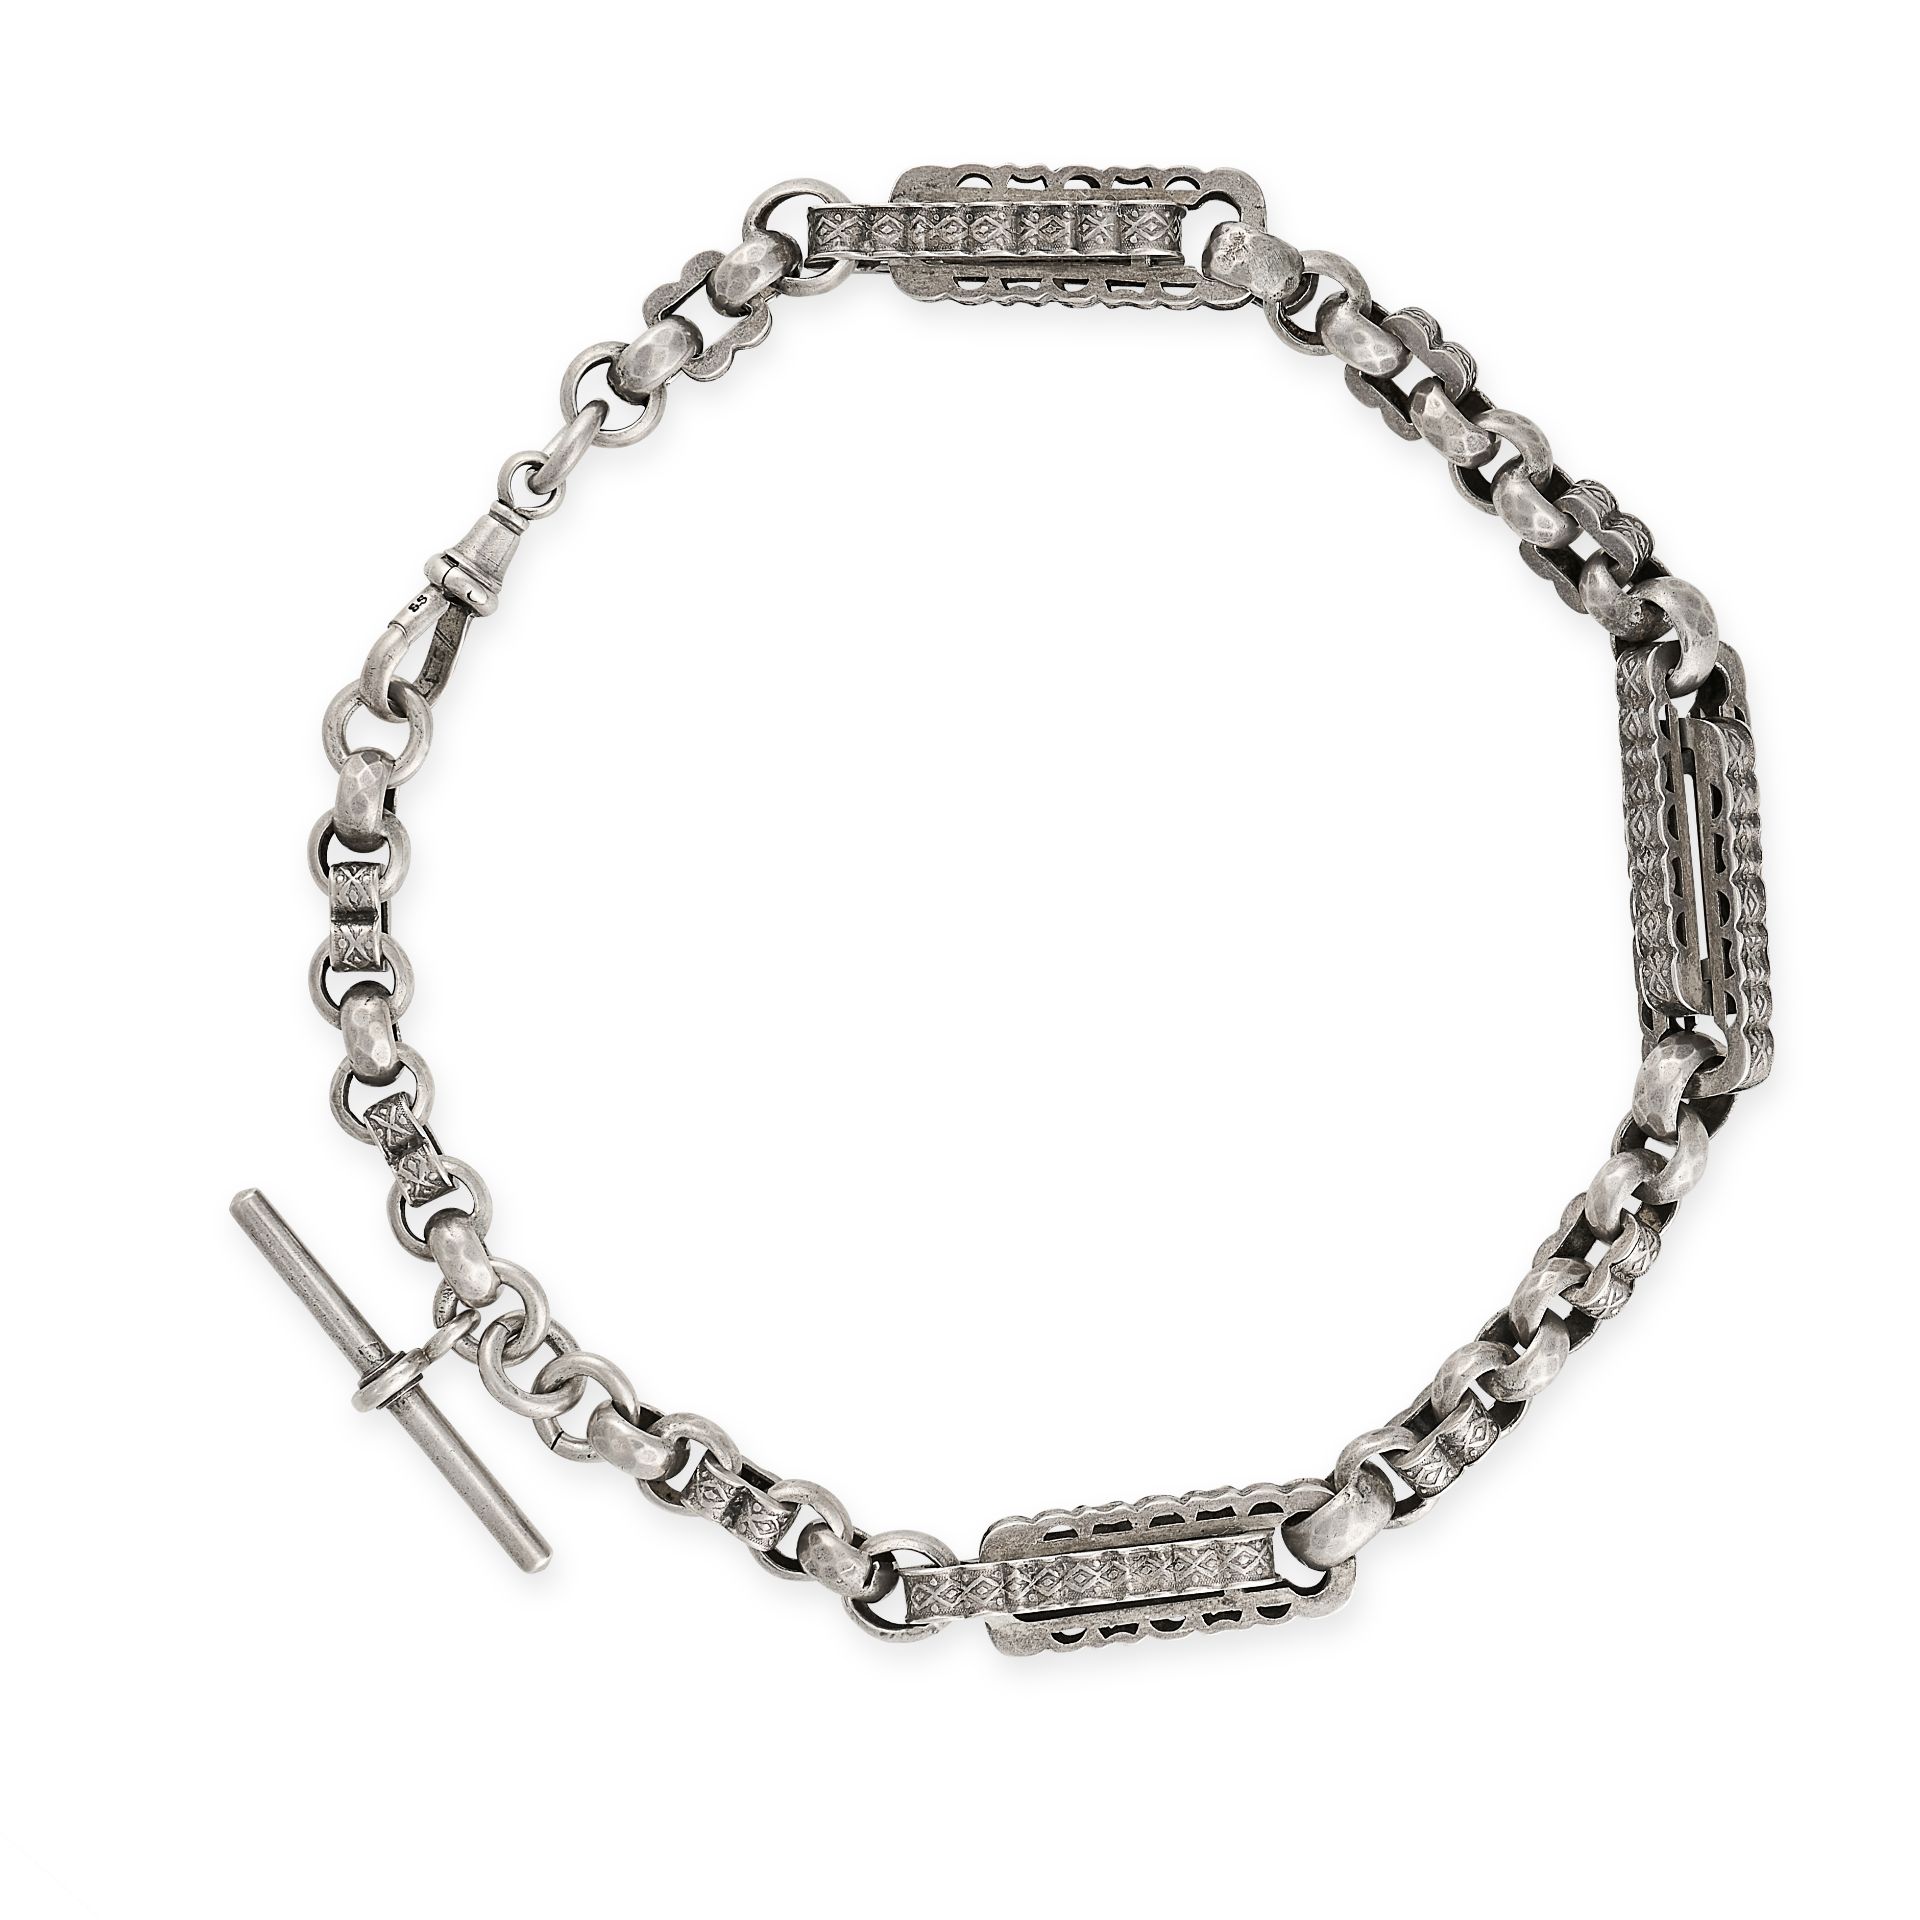 AN ANTIQUE SILVER T-BAR WATCH CHAIN formed of a series of fancy links with various textured and